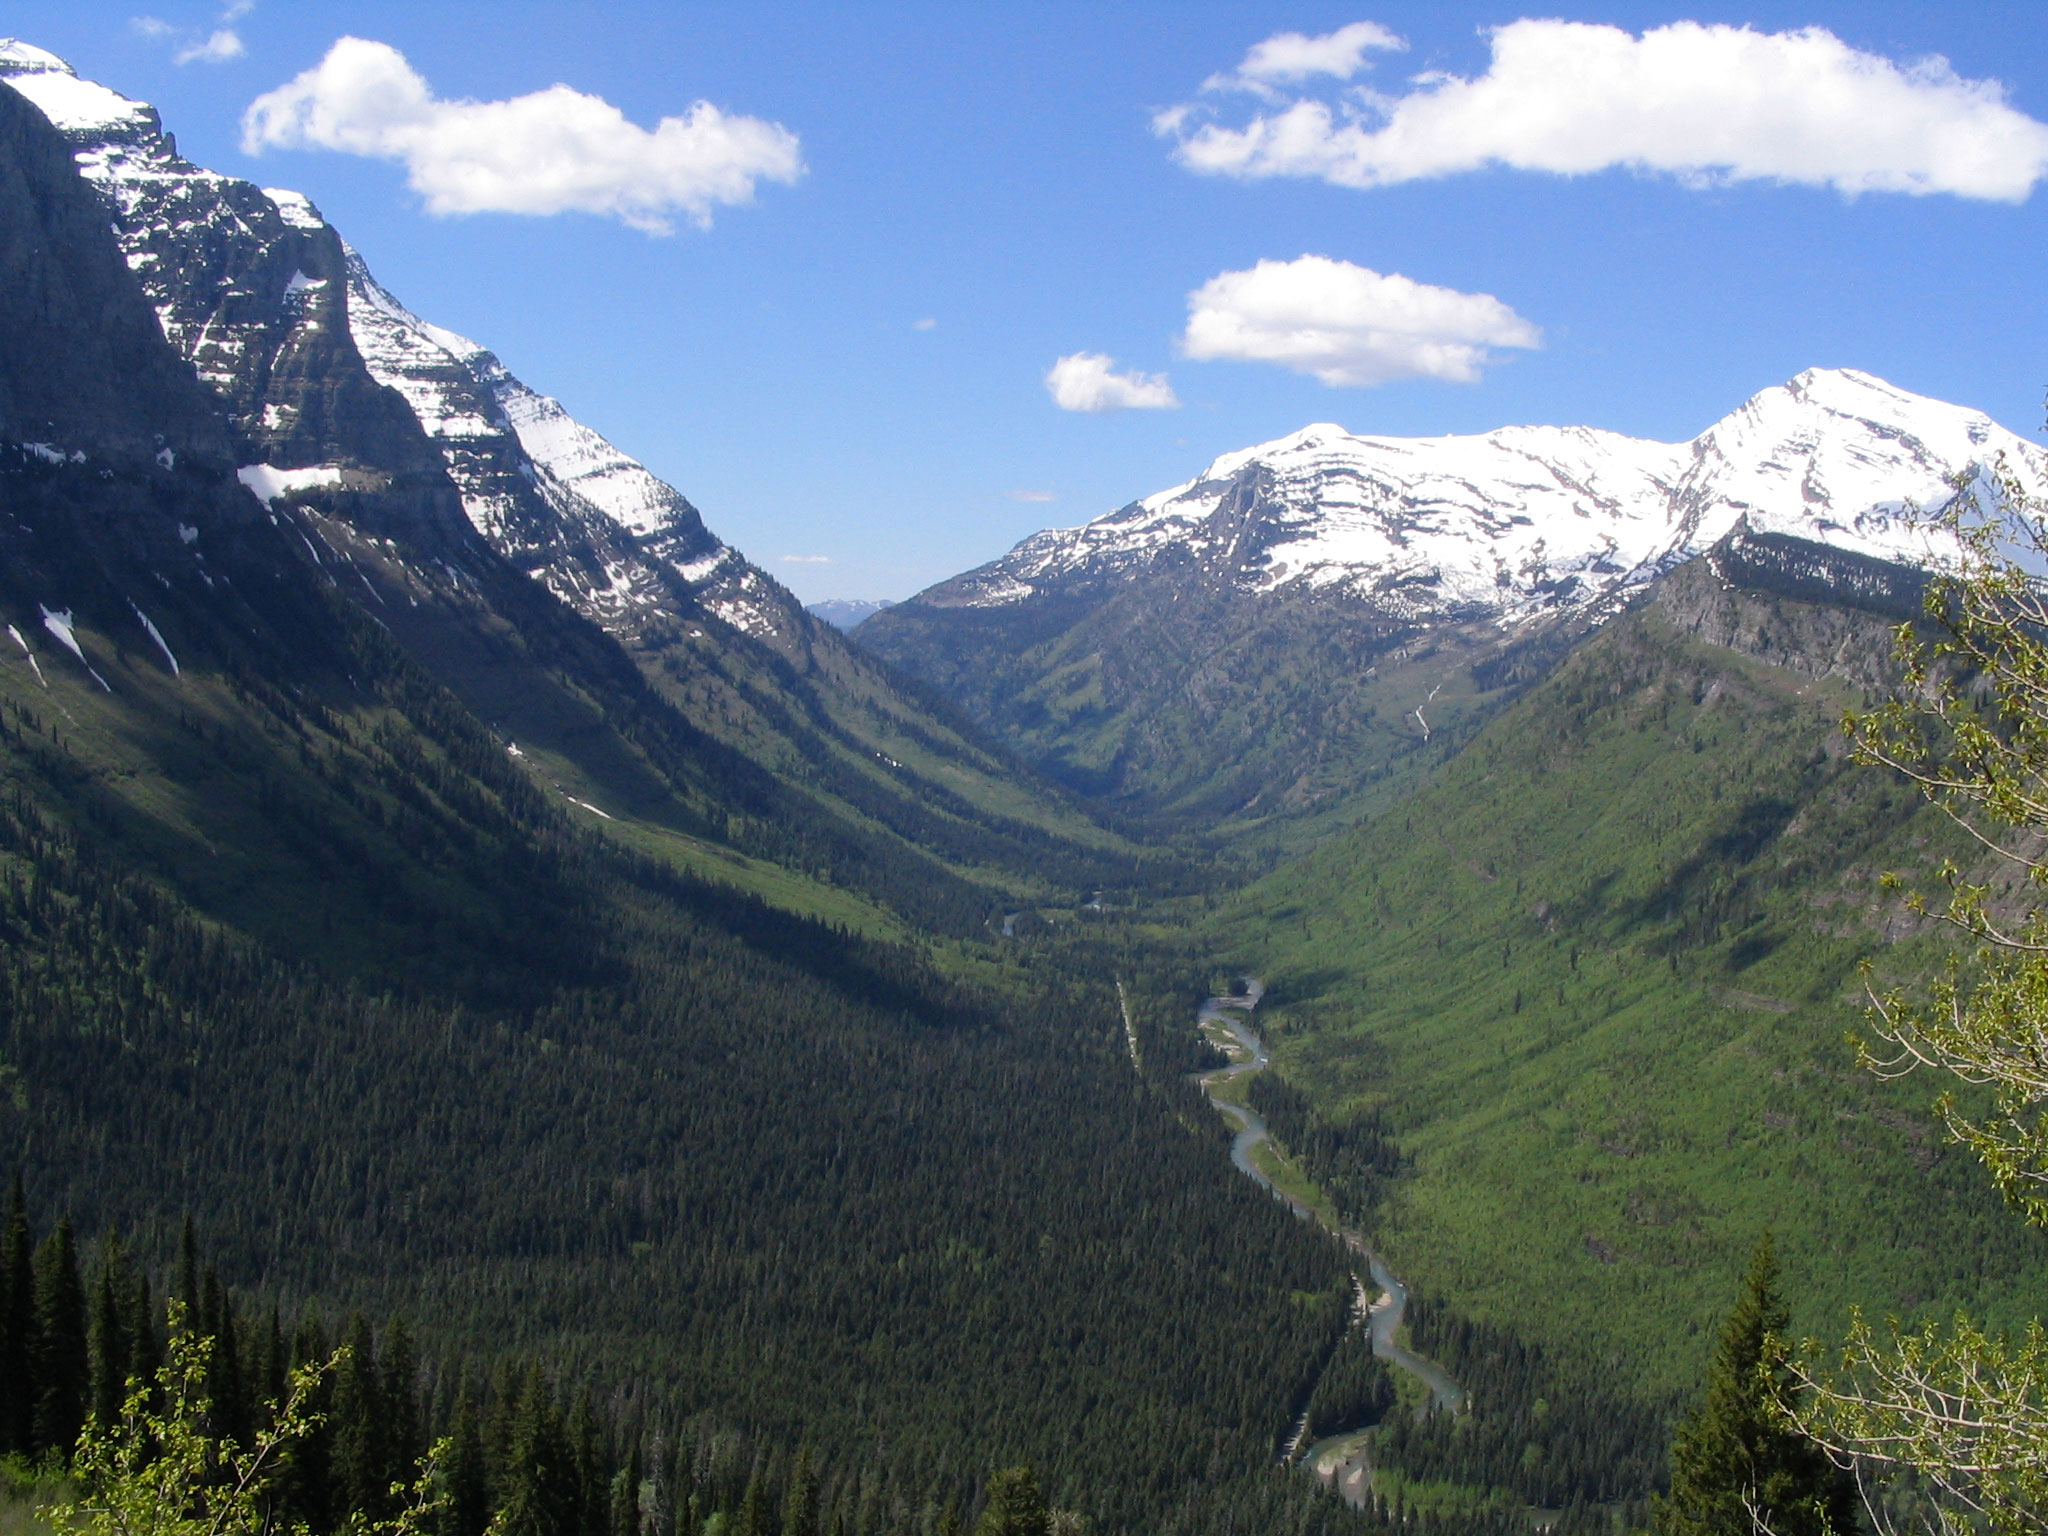 Photograph of a U-shaped, glacially carved valley in Glacier National Park, Montana. The photo shows a broad, u-shaped valley with snow-dusted mountain slopes rising on the left and snow-dusted mountain peaks in the background at right. At lower elevations, the slopes are vegetated.